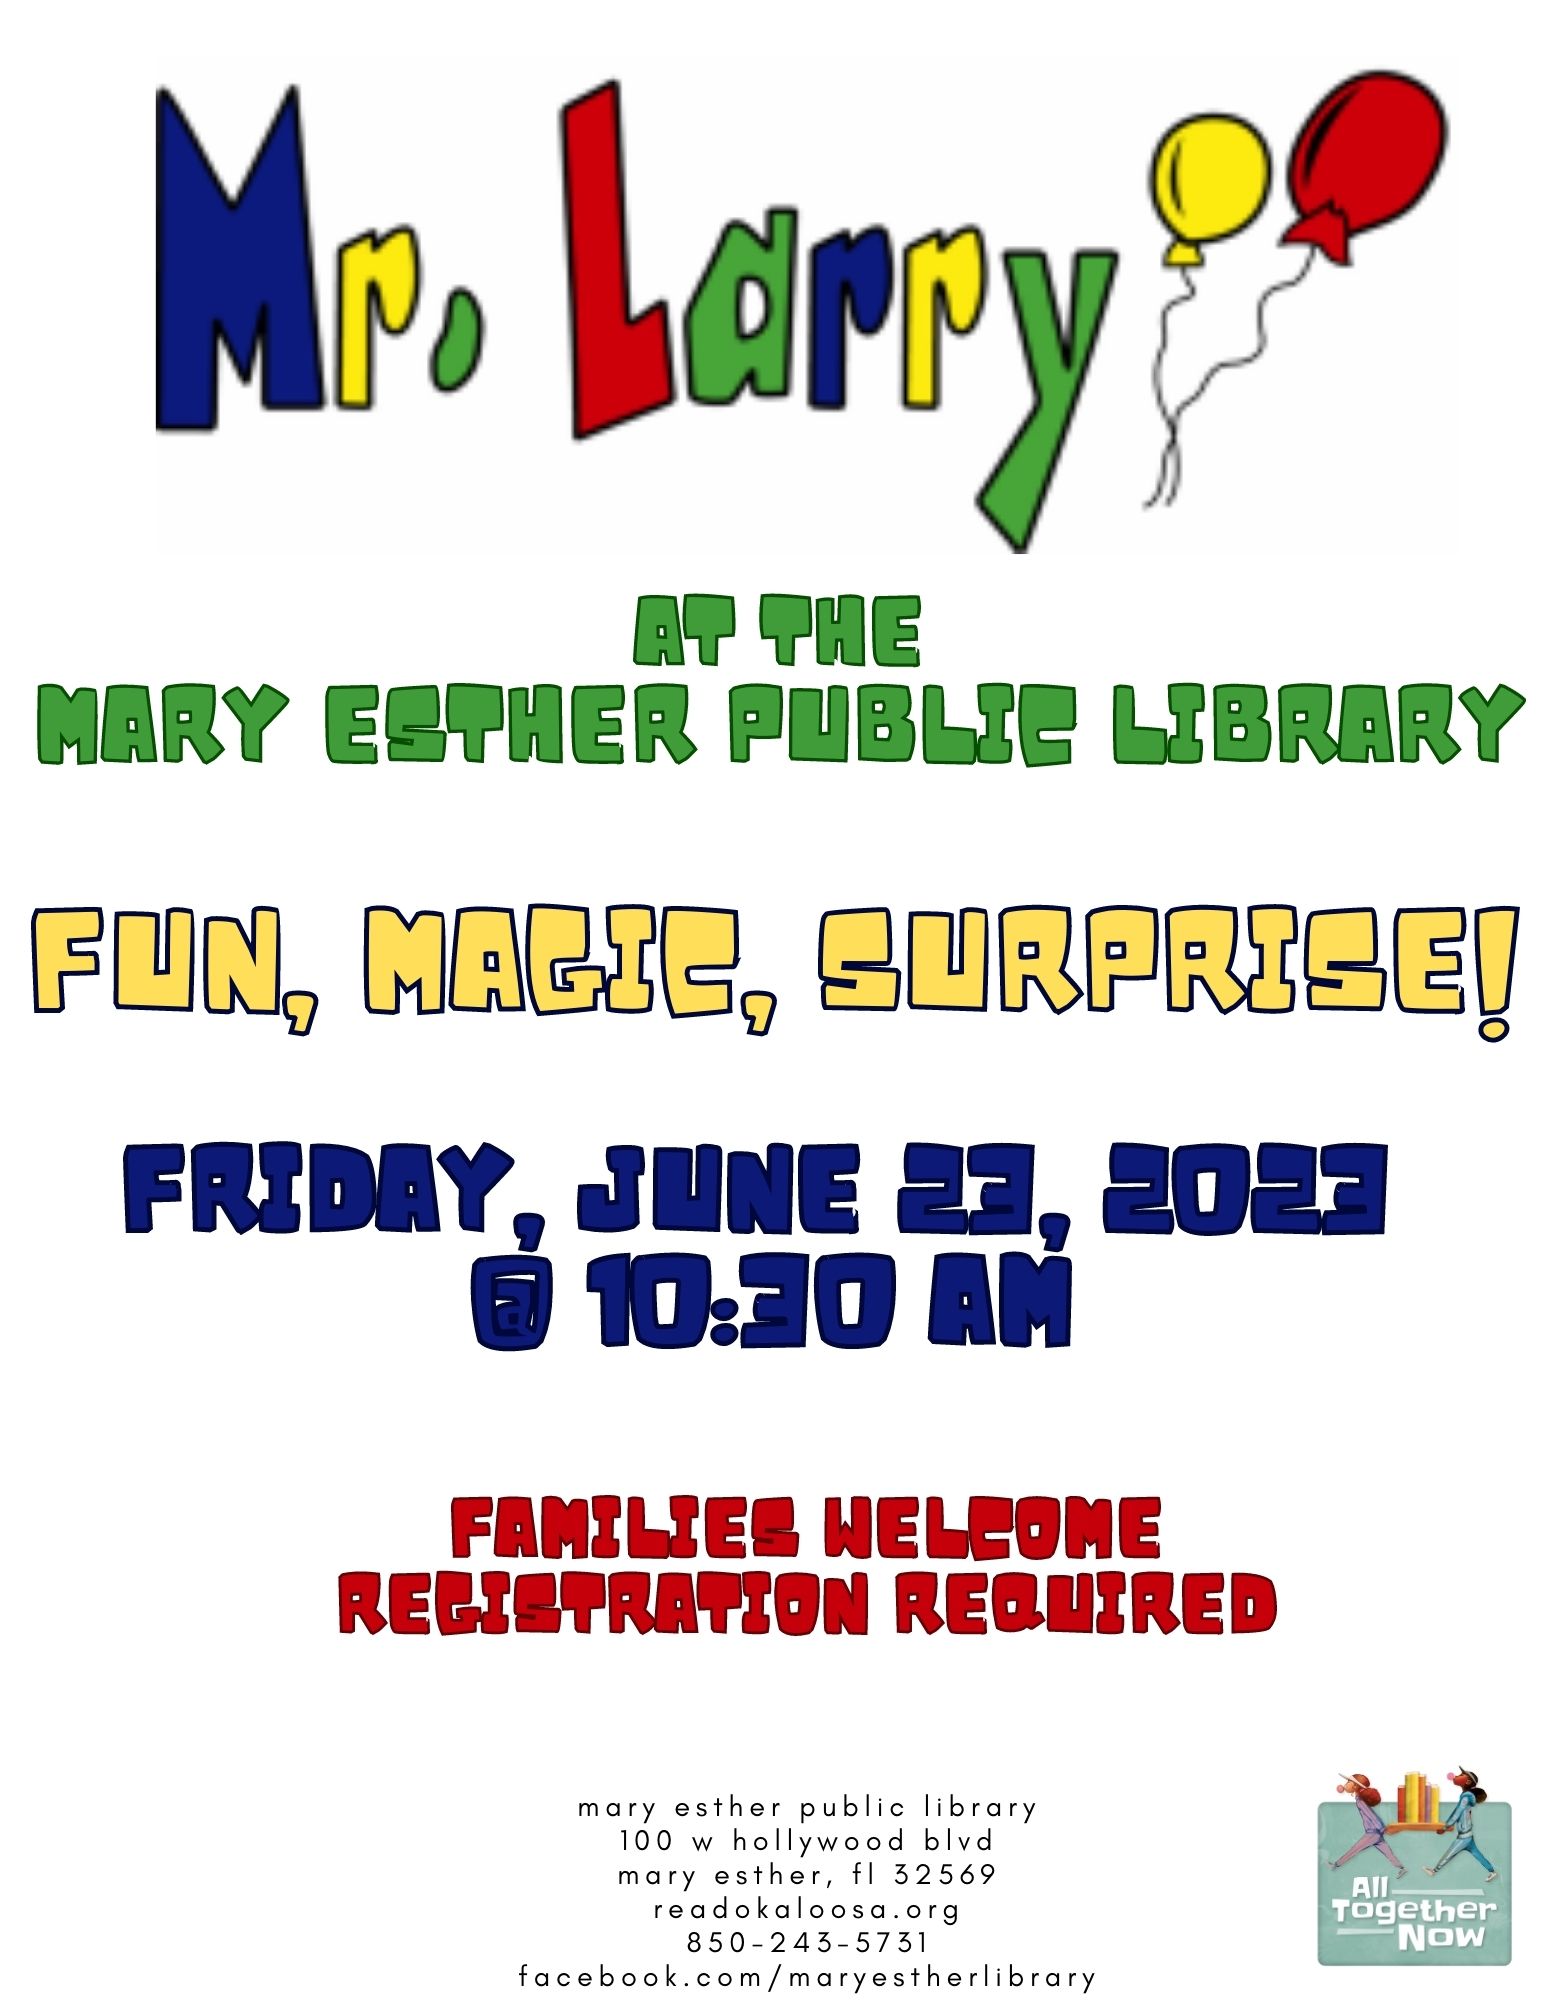 mr larry's magic show at the mary esther public library friday june 23 at 10:30 am